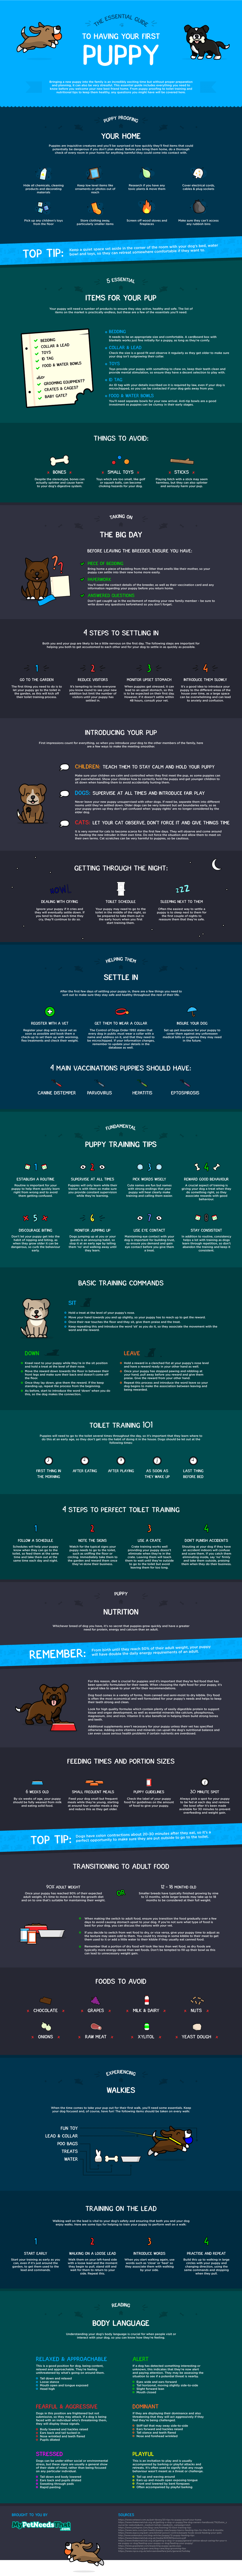 Borderlands 2 Porno Mags - The Essential Guide to Having Your First Puppy [Infographics ...